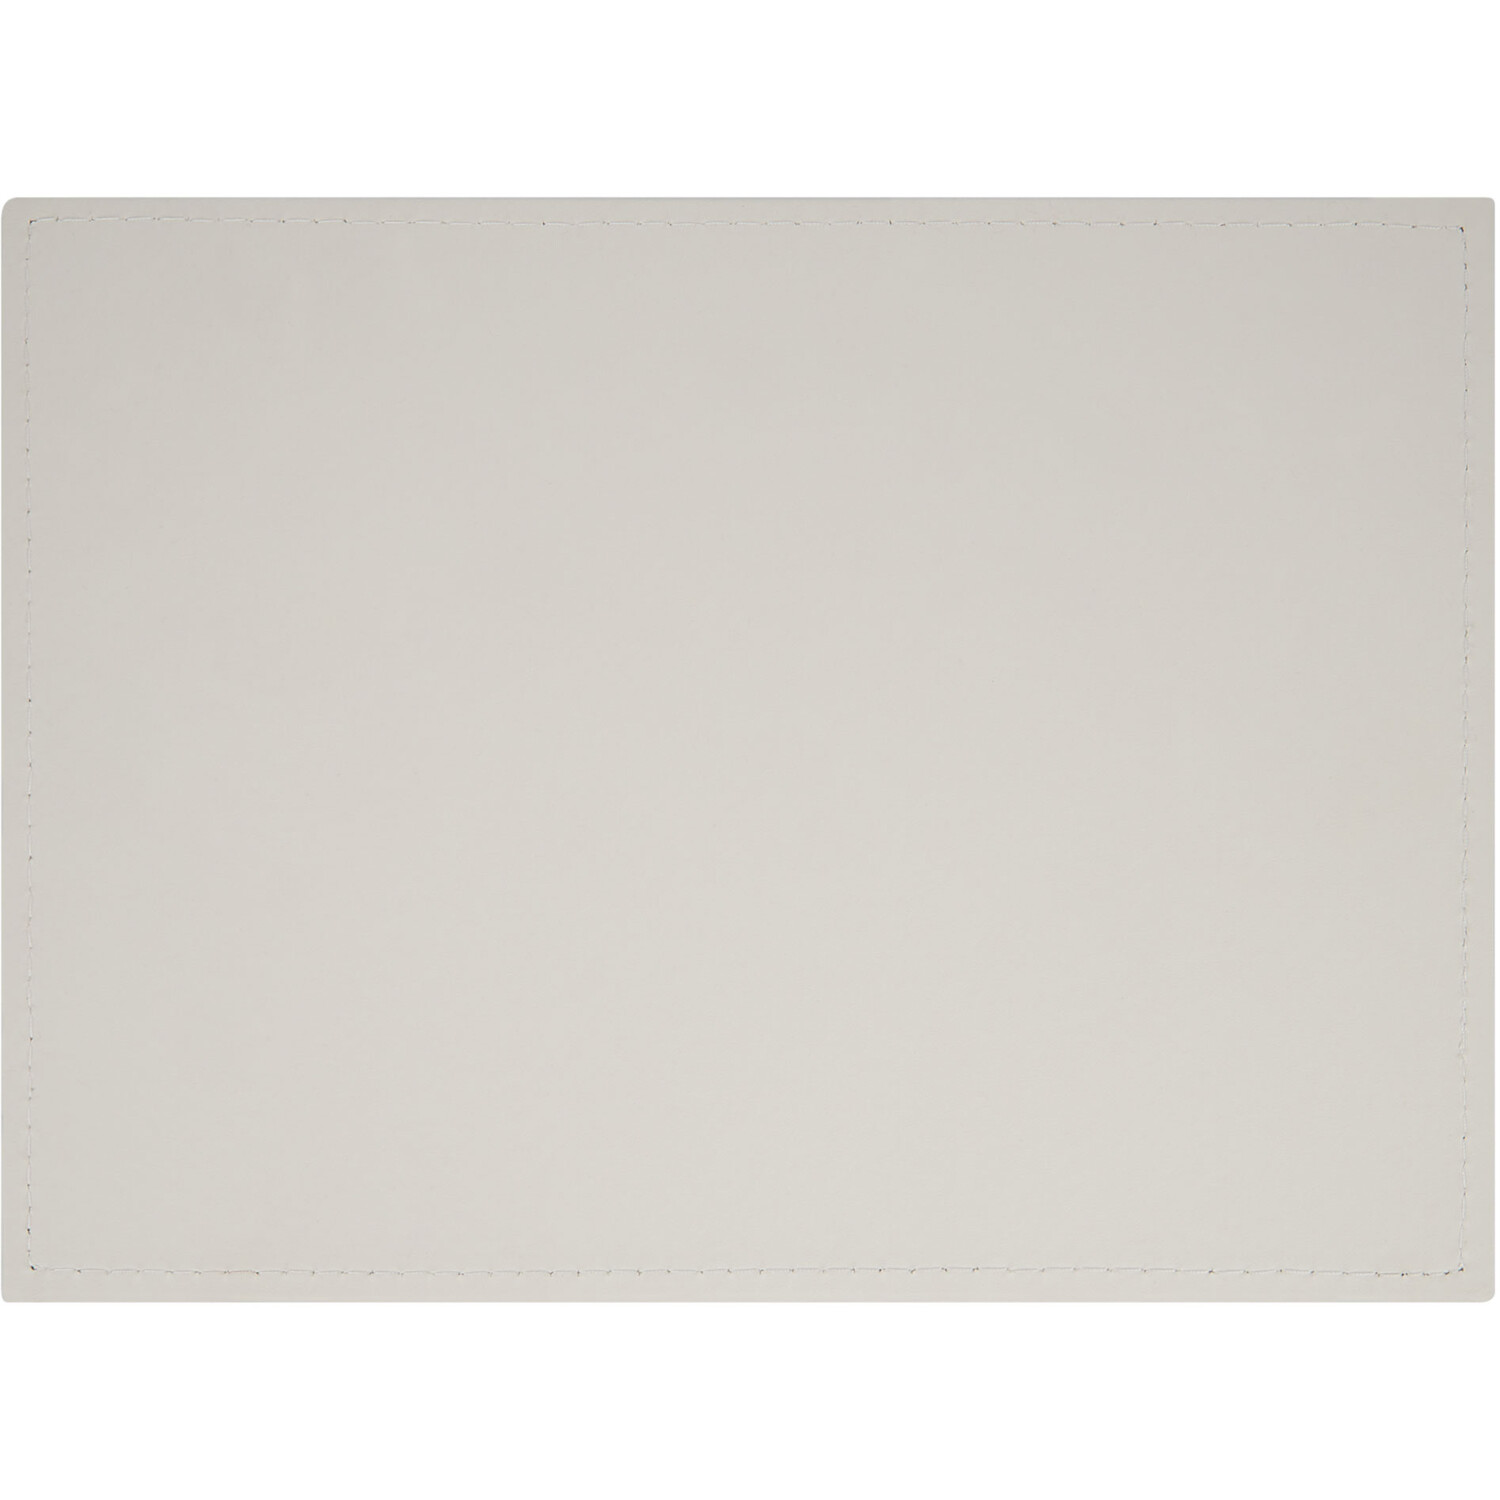 Pack of 4 Fusion Faux Leather Placemats - Natural Image 4